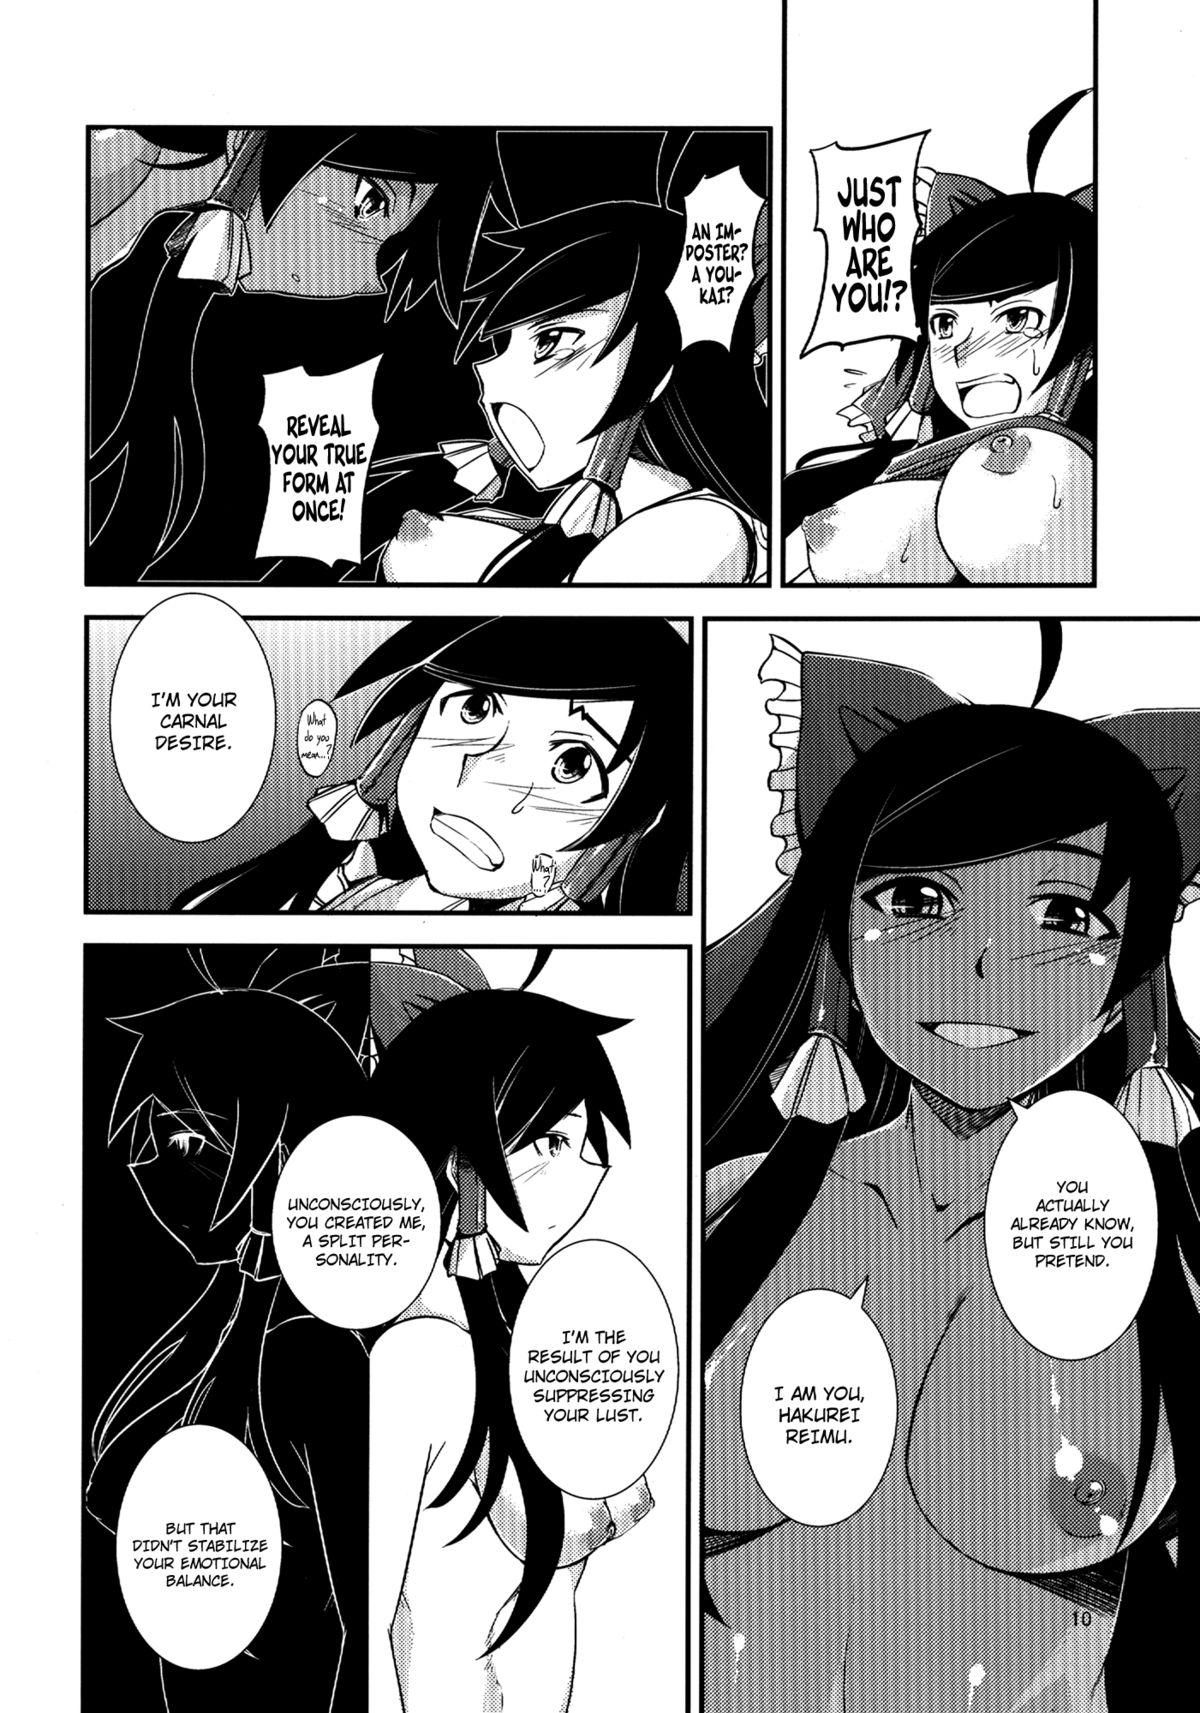 Double Blowjob The Incident of the Black Shrine Maiden - Touhou project Hot Brunette - Page 10